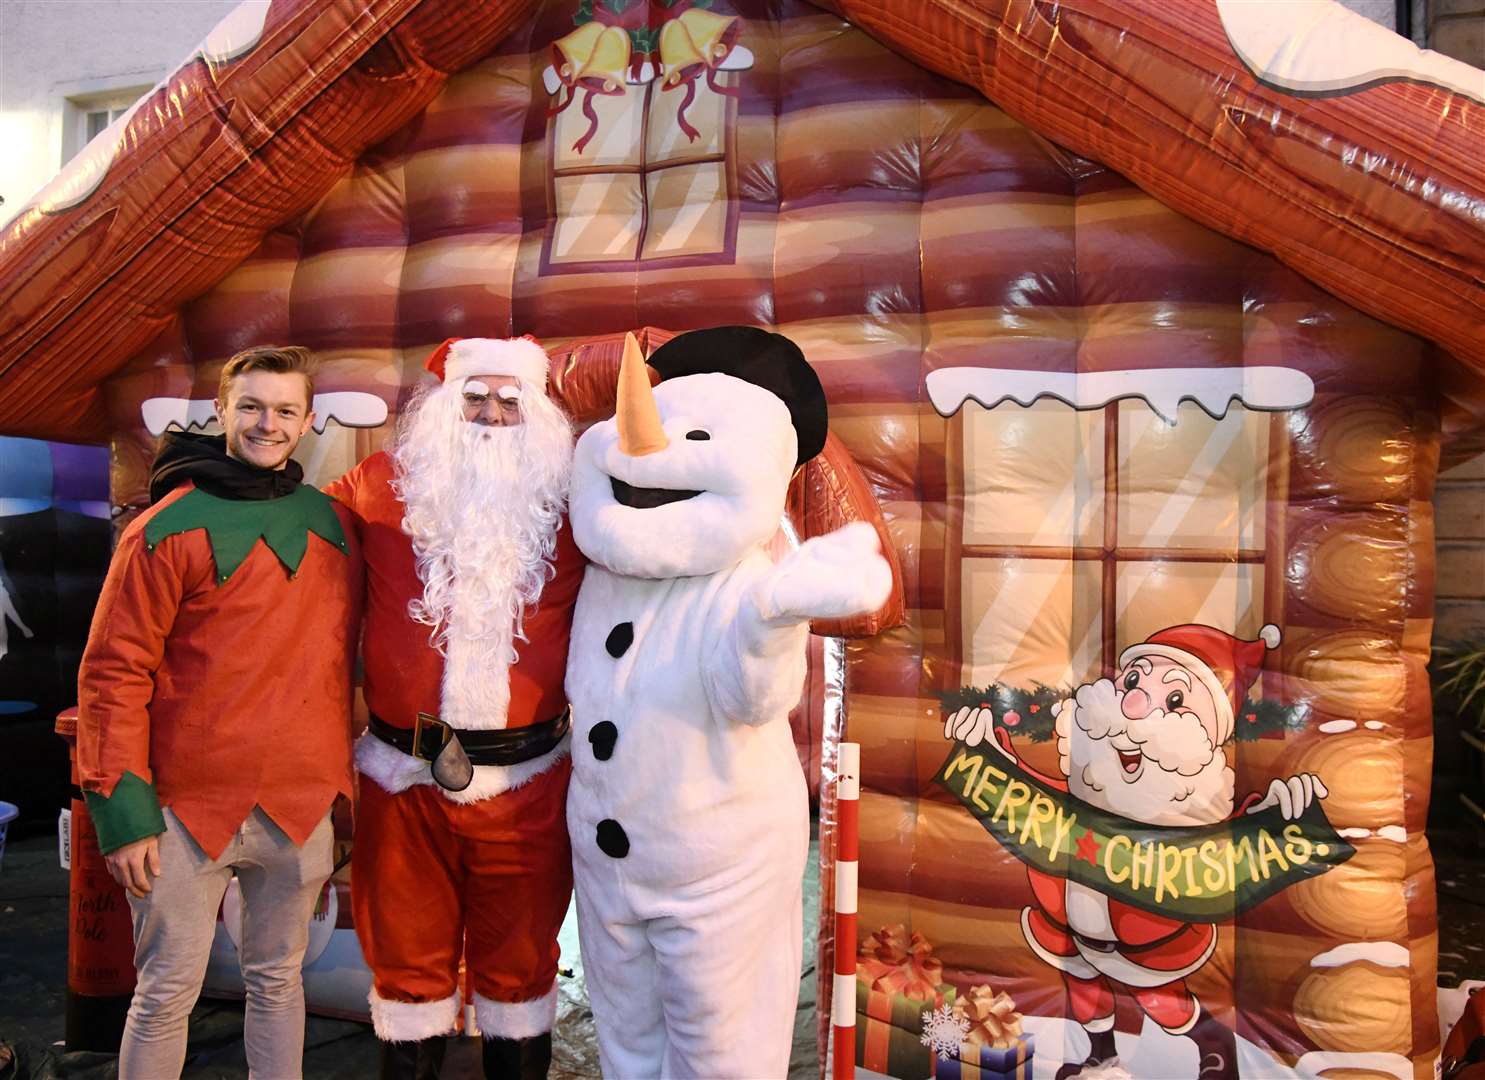 Rogan Read (left) with Santa and the snowman outside the Grotto at the Christmas Cracker. ..Banff Christmas Cracker, 2022...Picture: Beth Taylor.